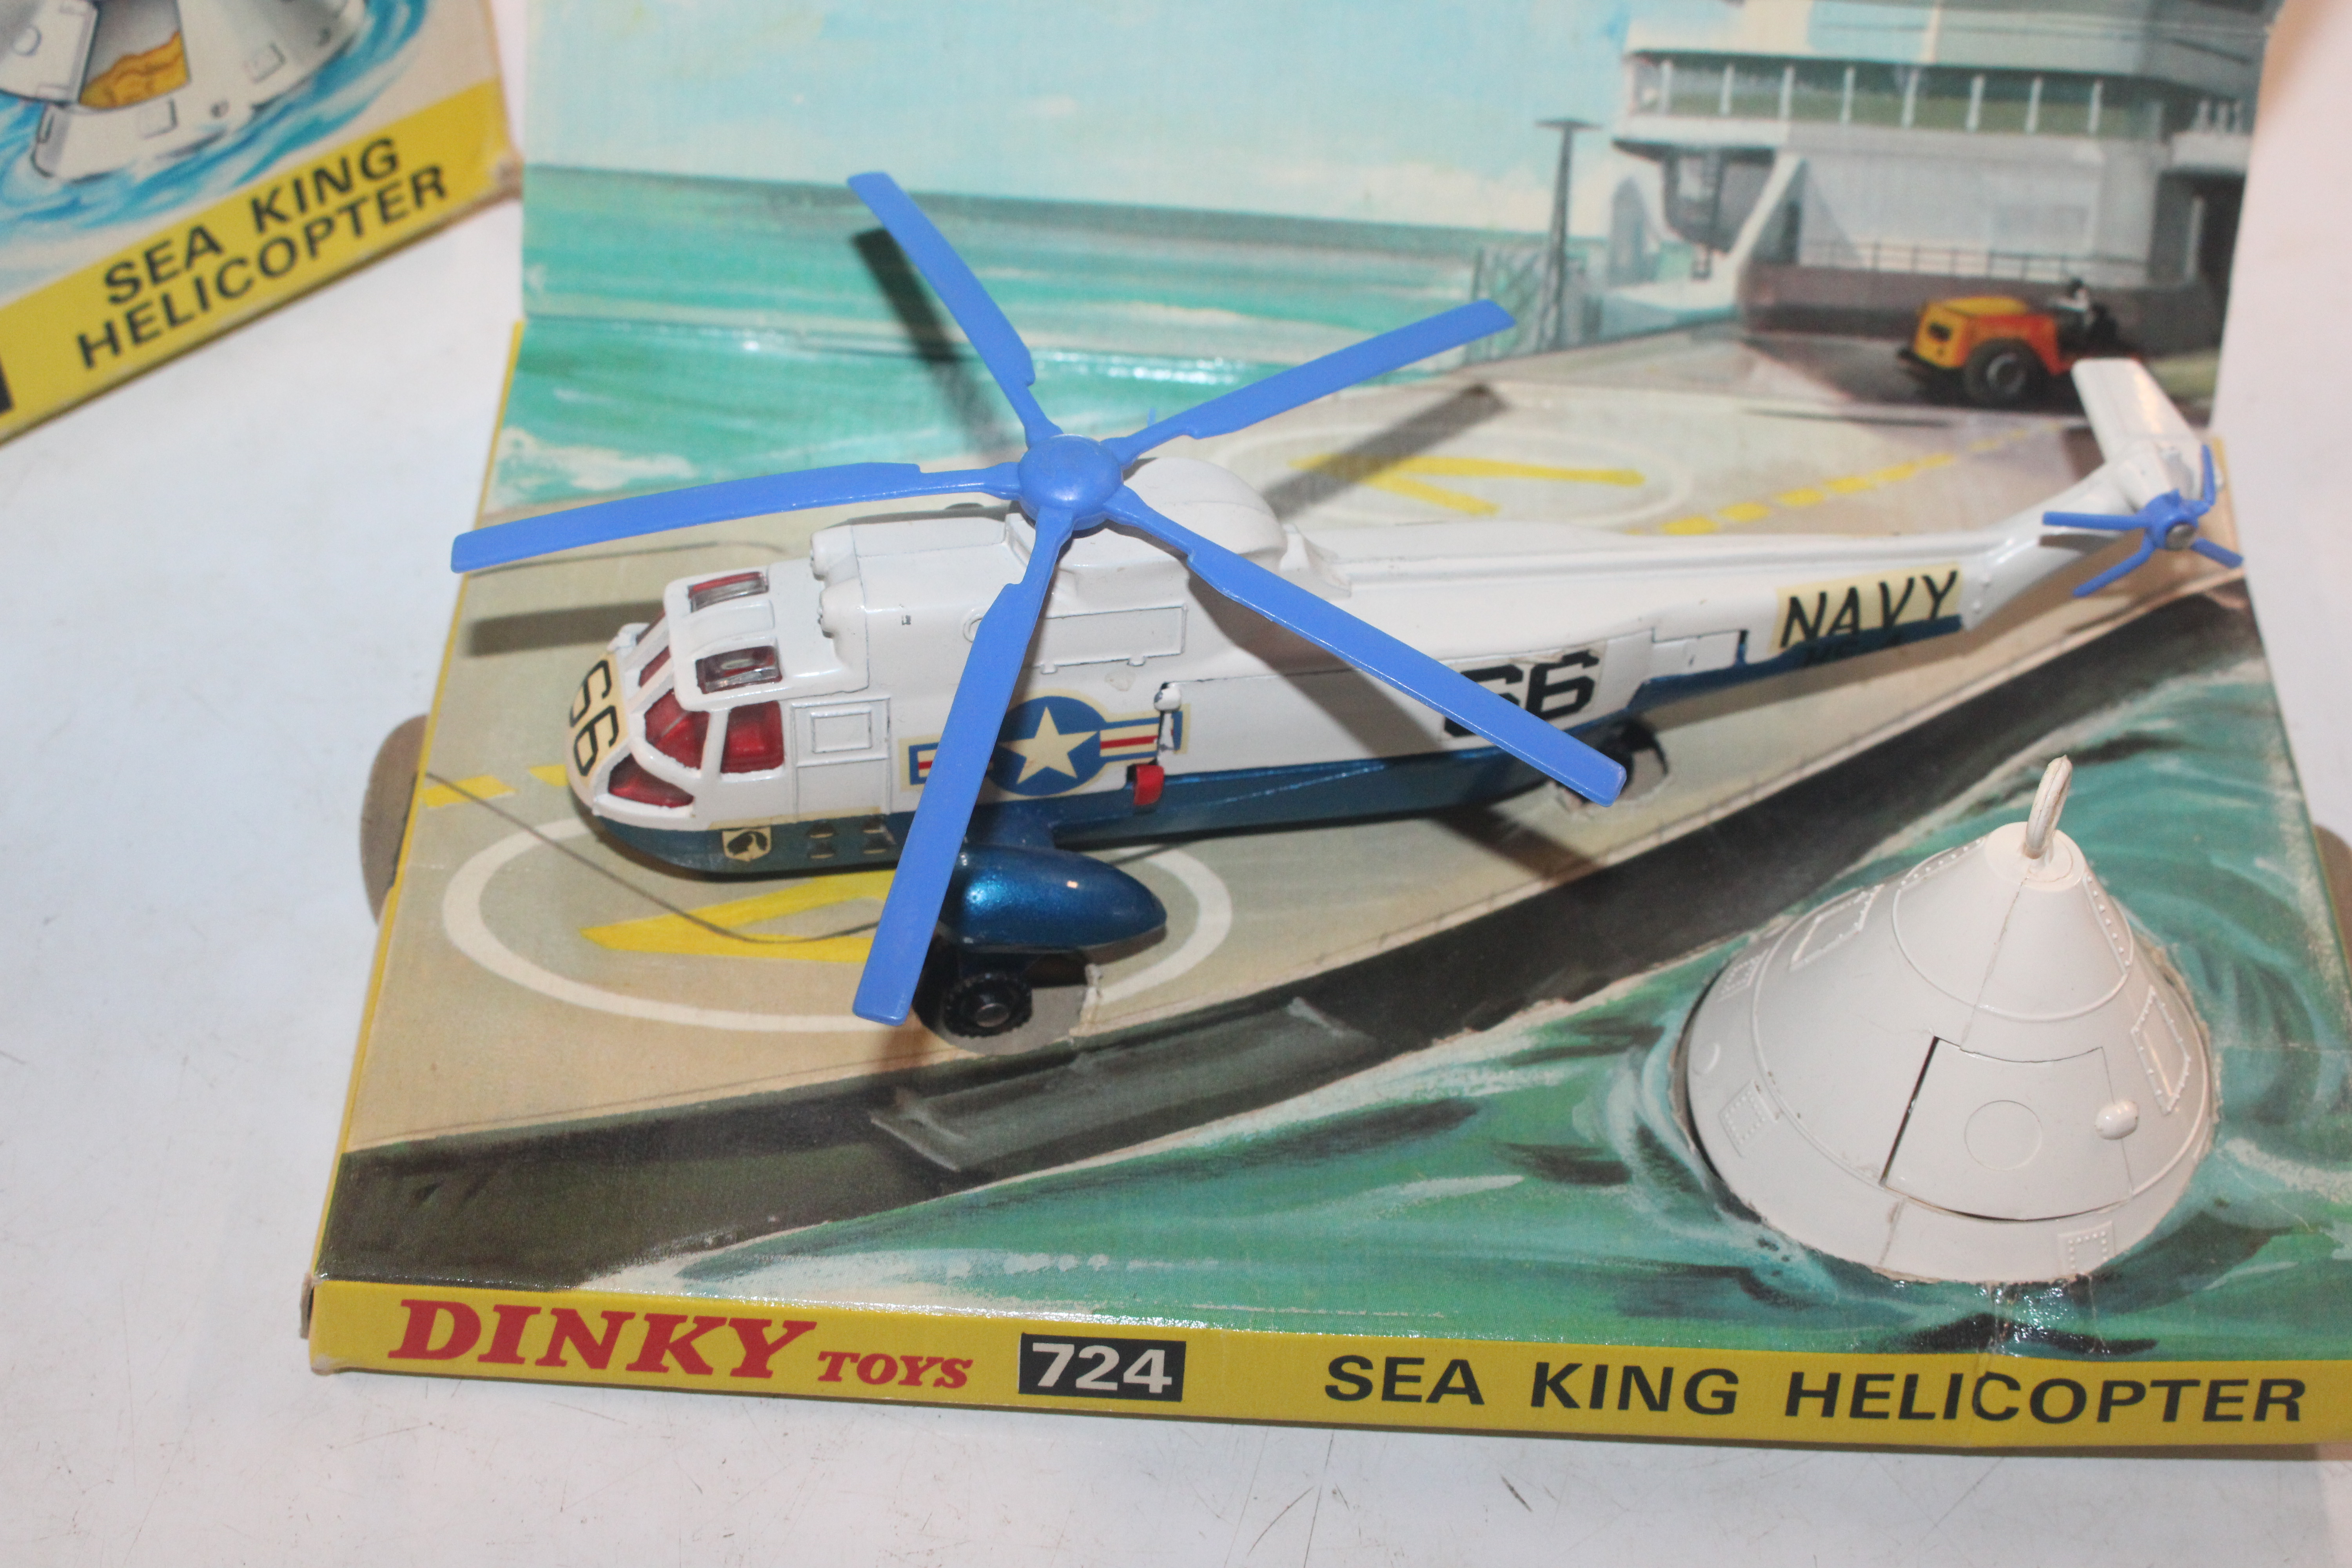 A Dinky toy 724 Sea King helicopter and box - Image 2 of 4